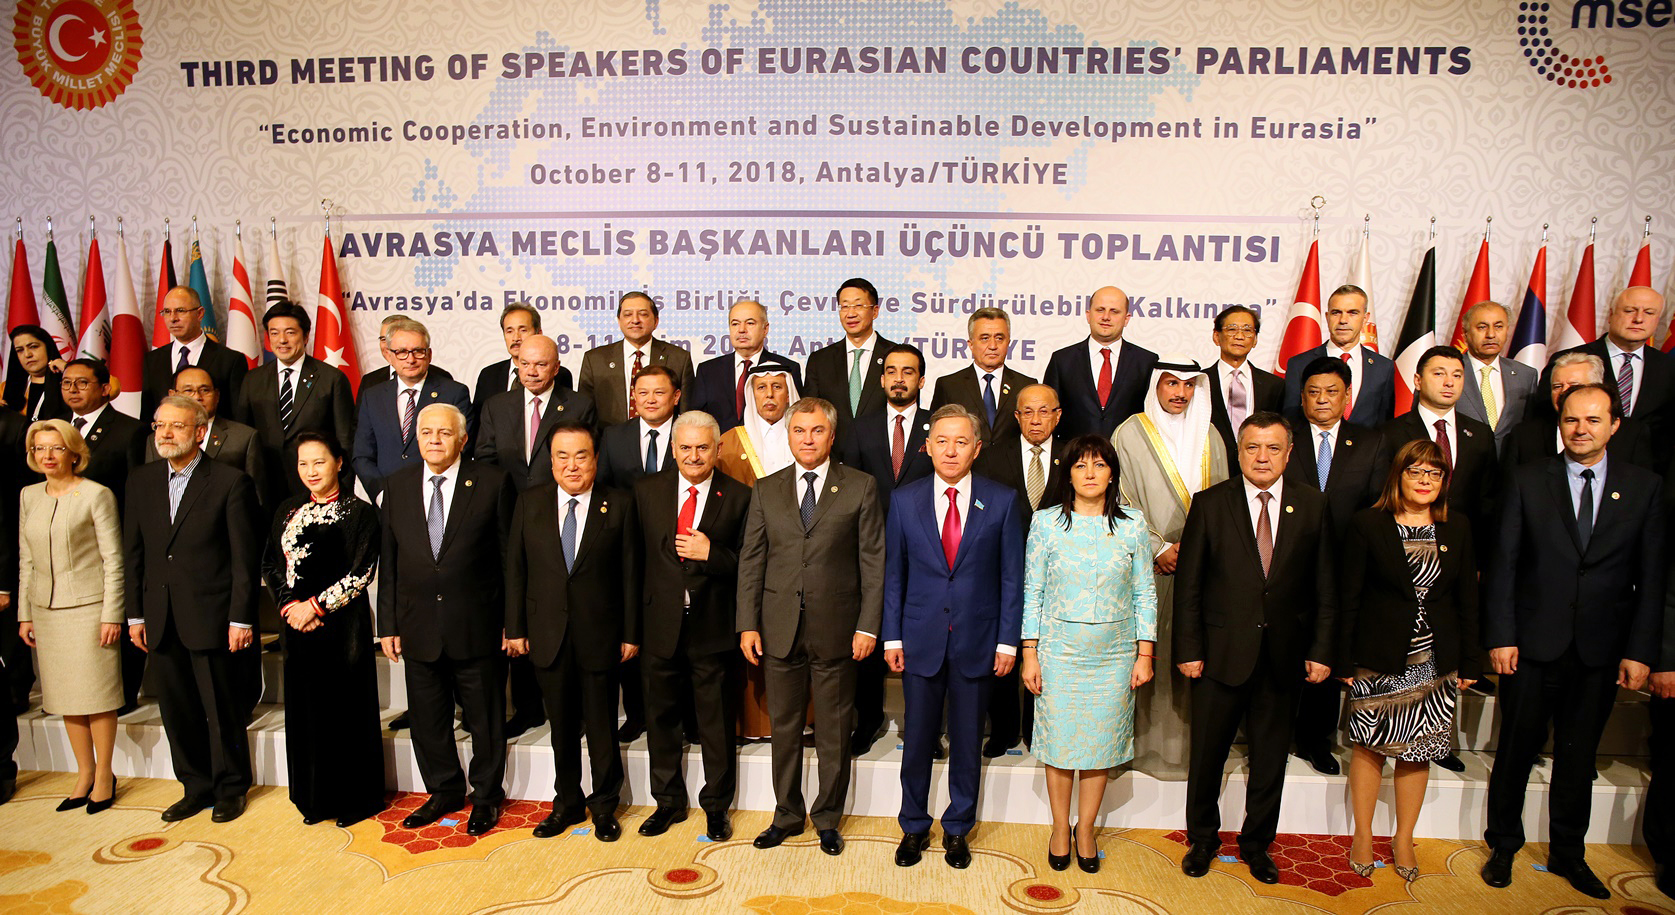 The Third Meeting of Speakers of Eurasian Countries Parliaments 